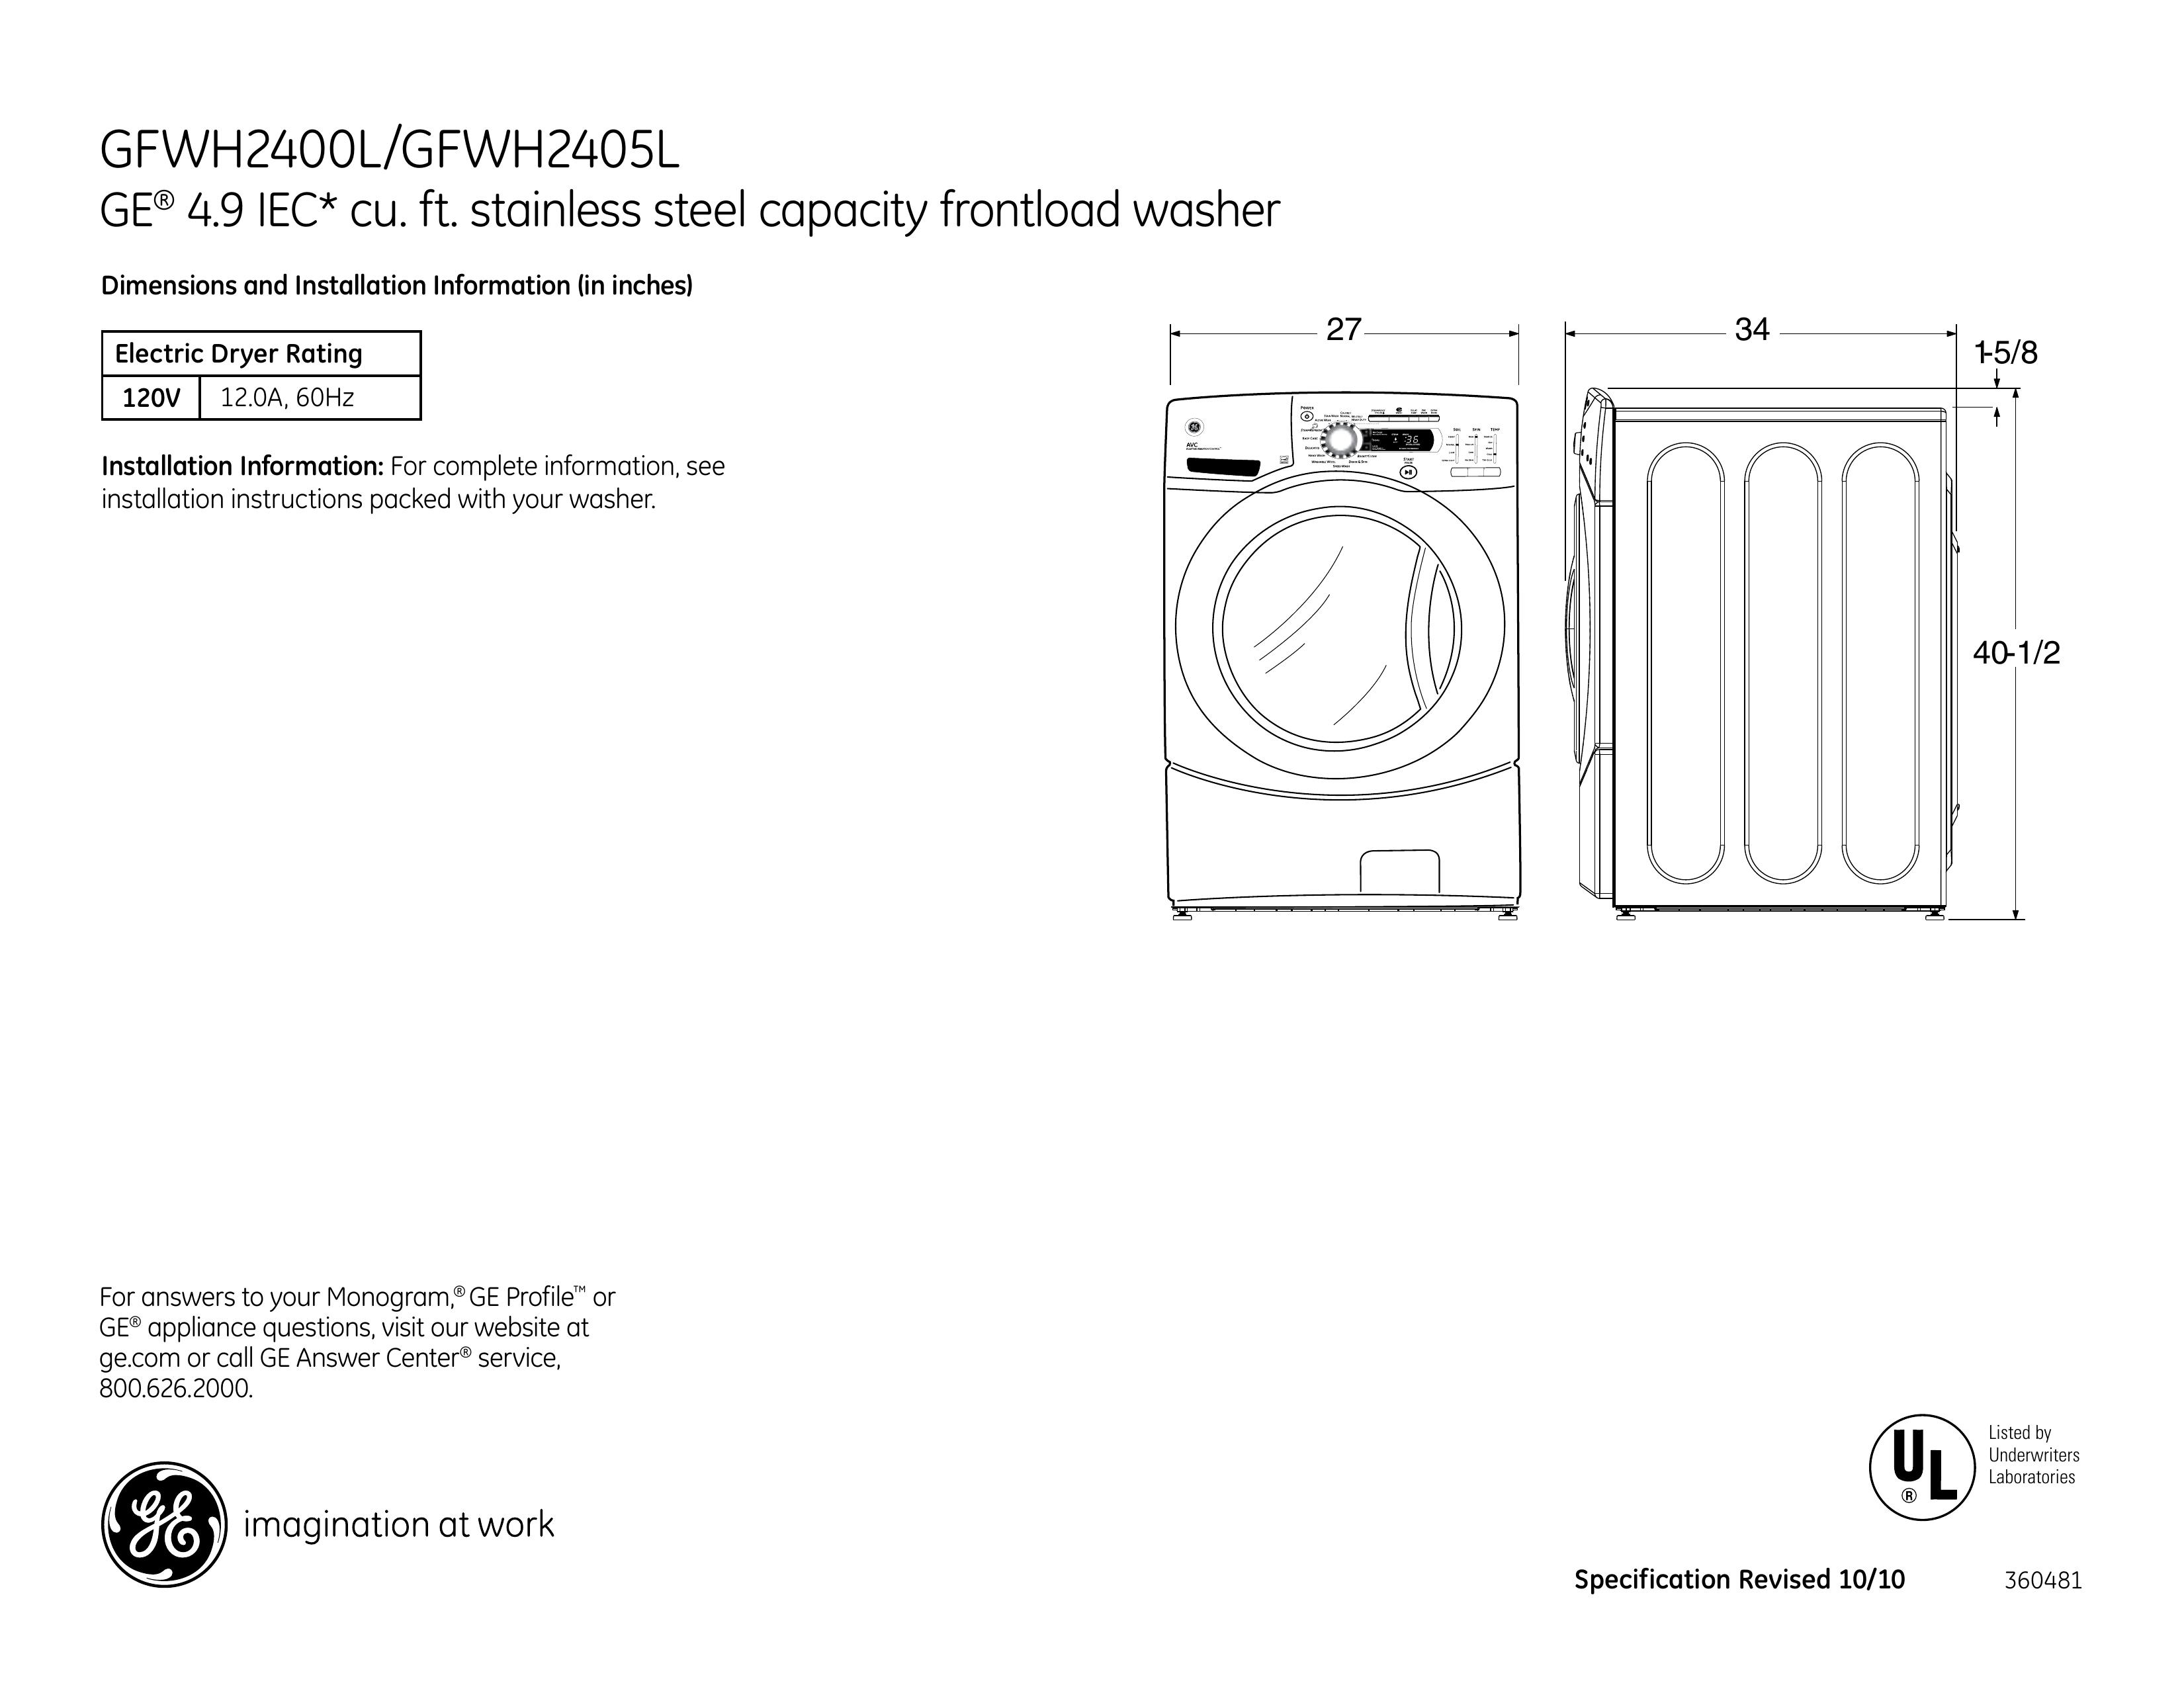 GE GFWH2400L Washer User Manual